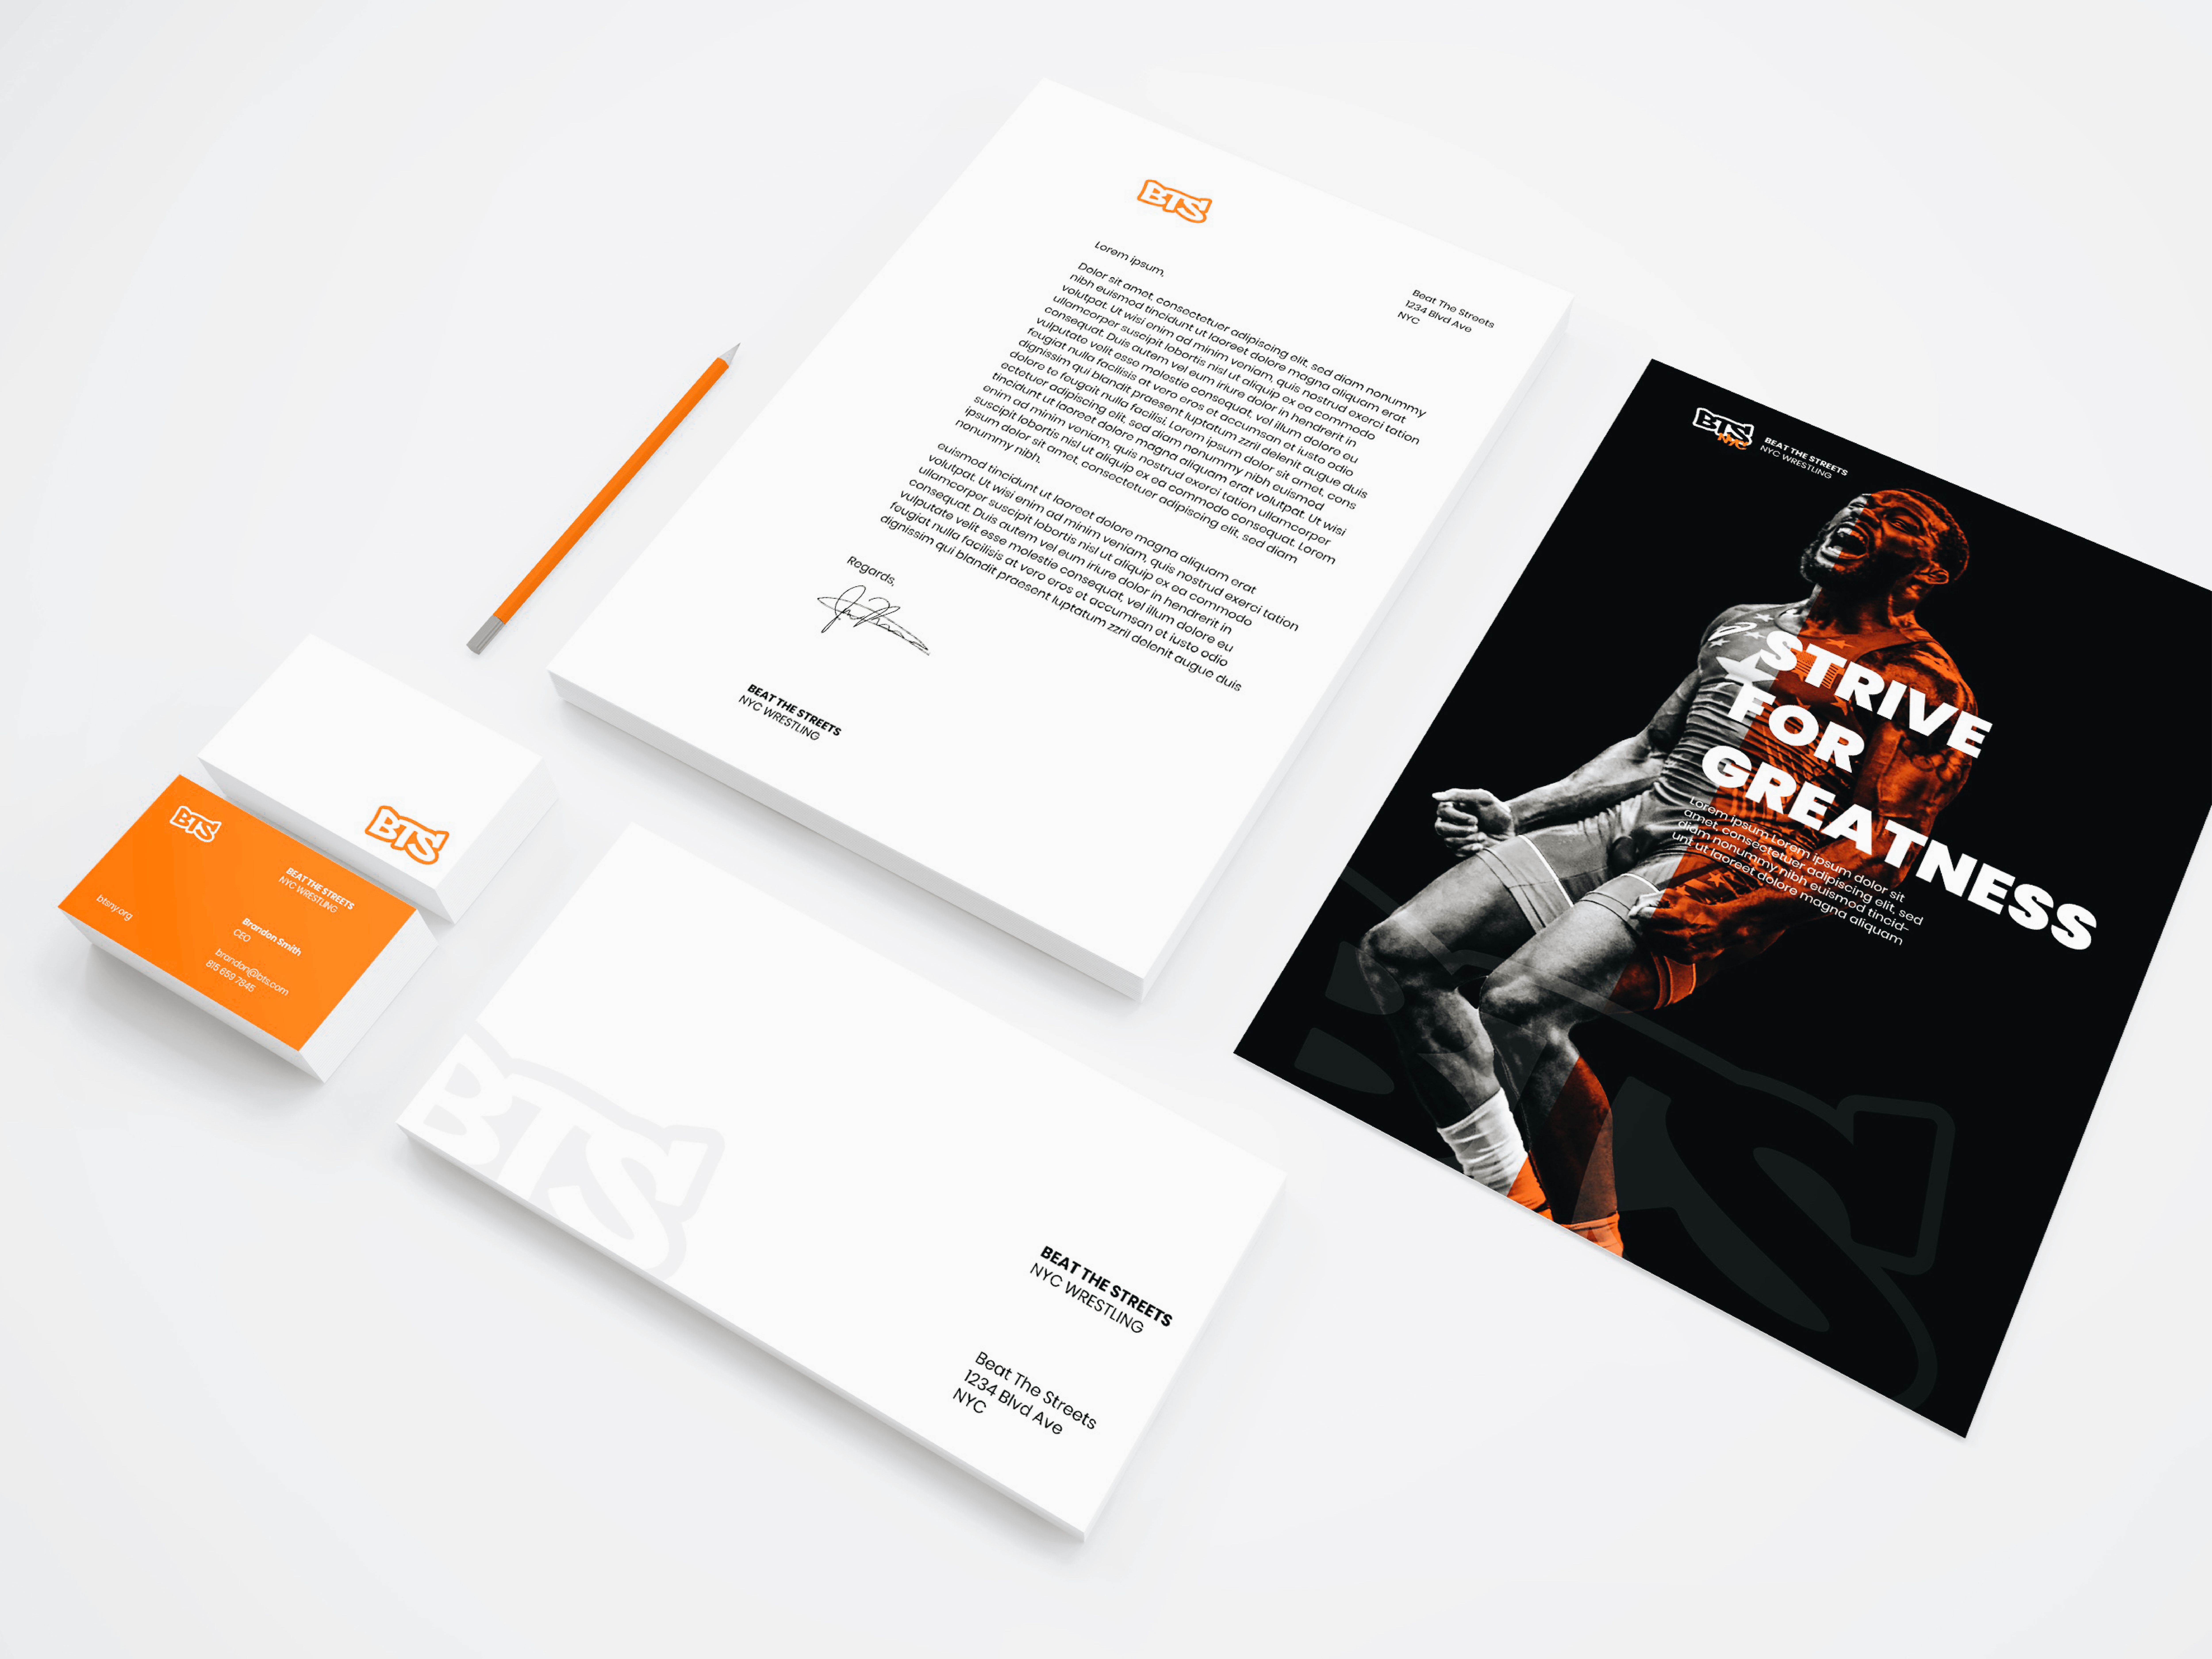 Brand Asset package of a re branding project for Beat the Streets includes posters, stationary, business cards and pencils